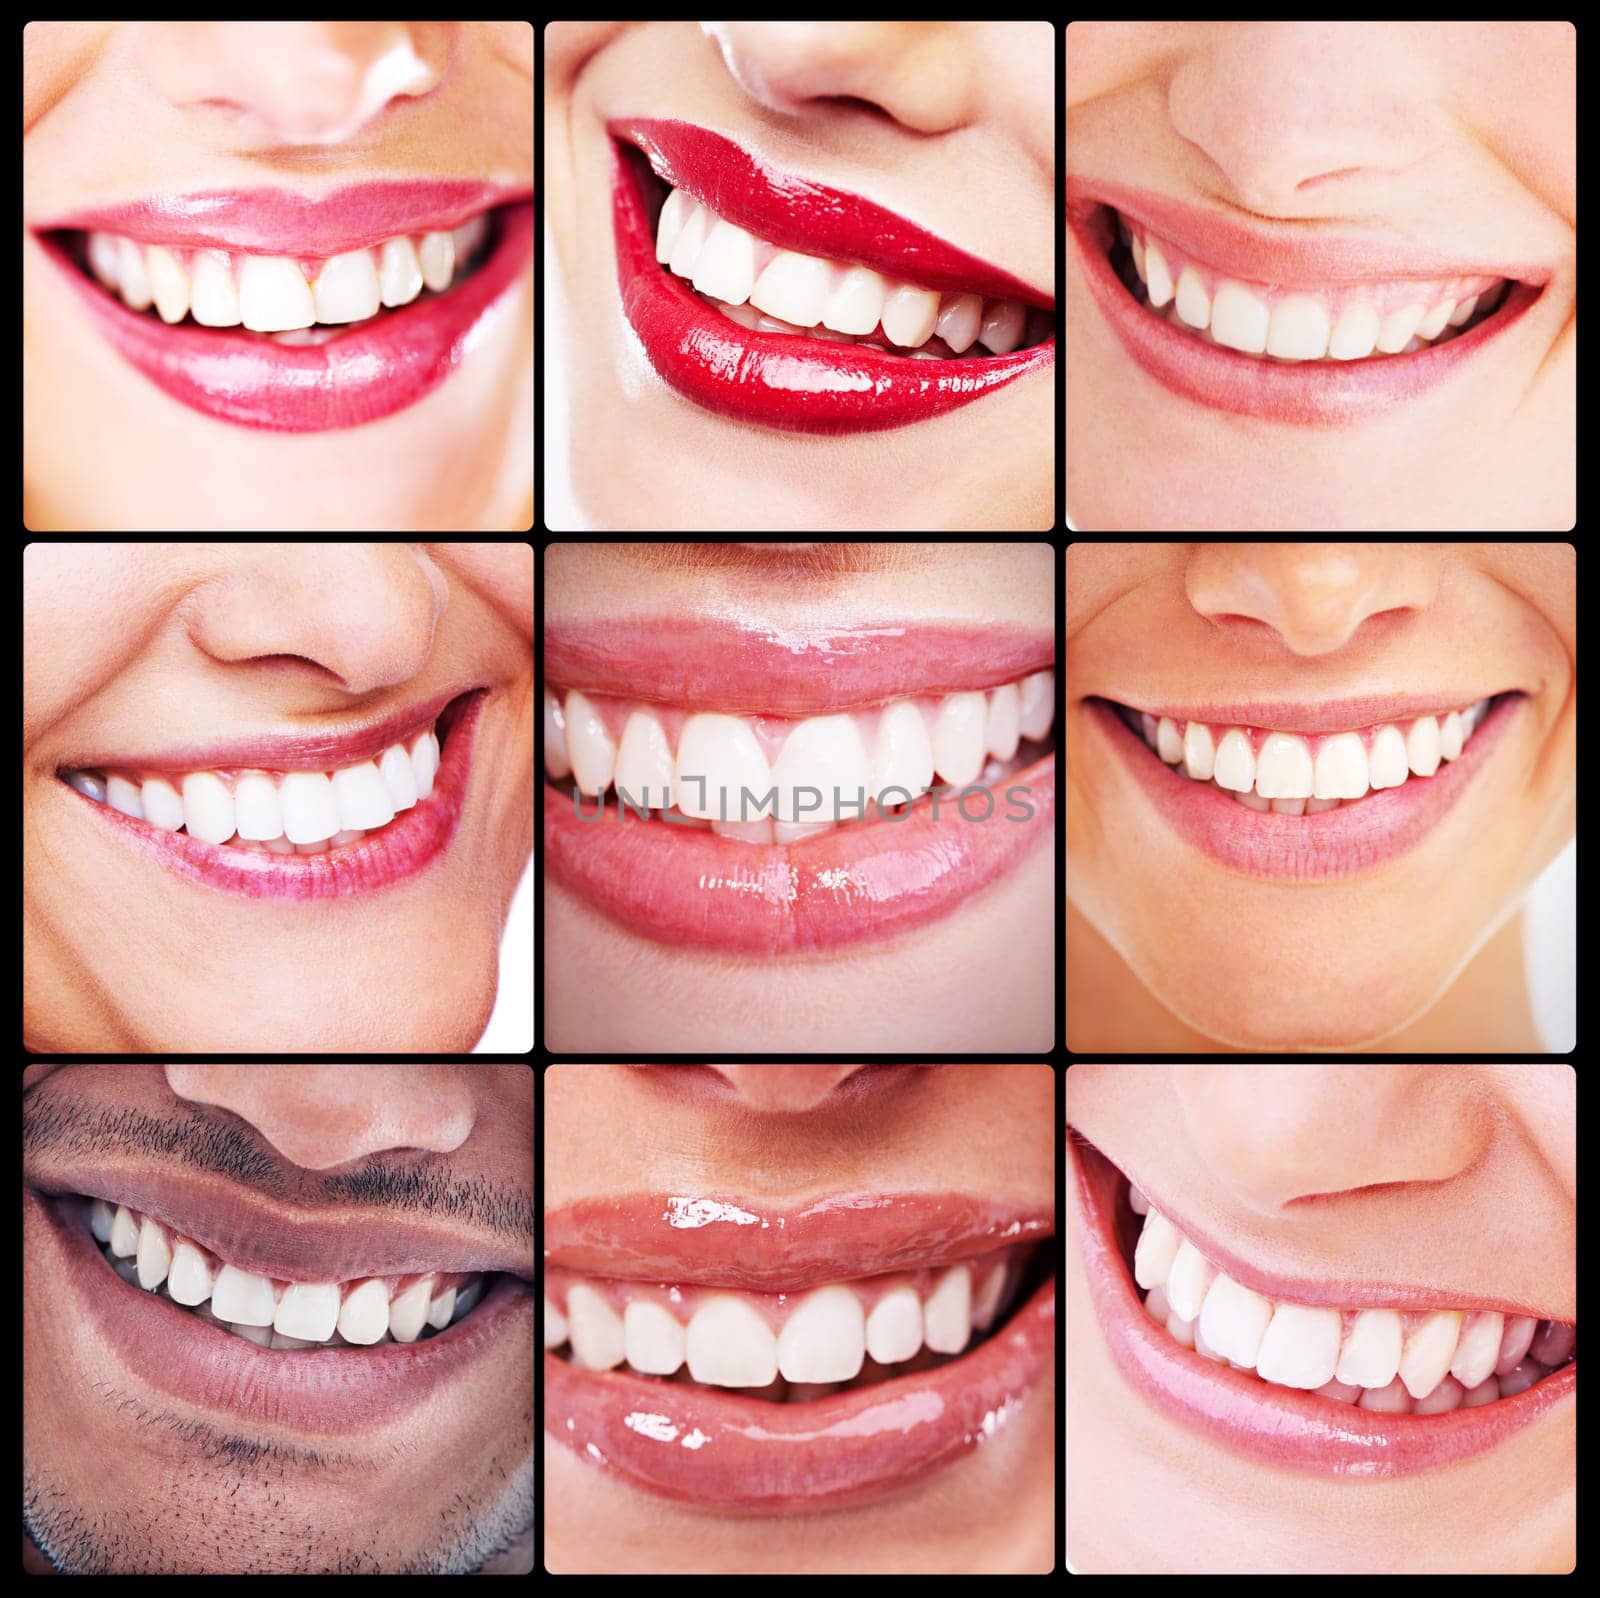 Dentistry, health and collage of teeth smiles with dental wellness and fresh mouth routine. Self care, cosmetic and montage of a diverse group of people with a clean, healthy and organic oral hygiene.